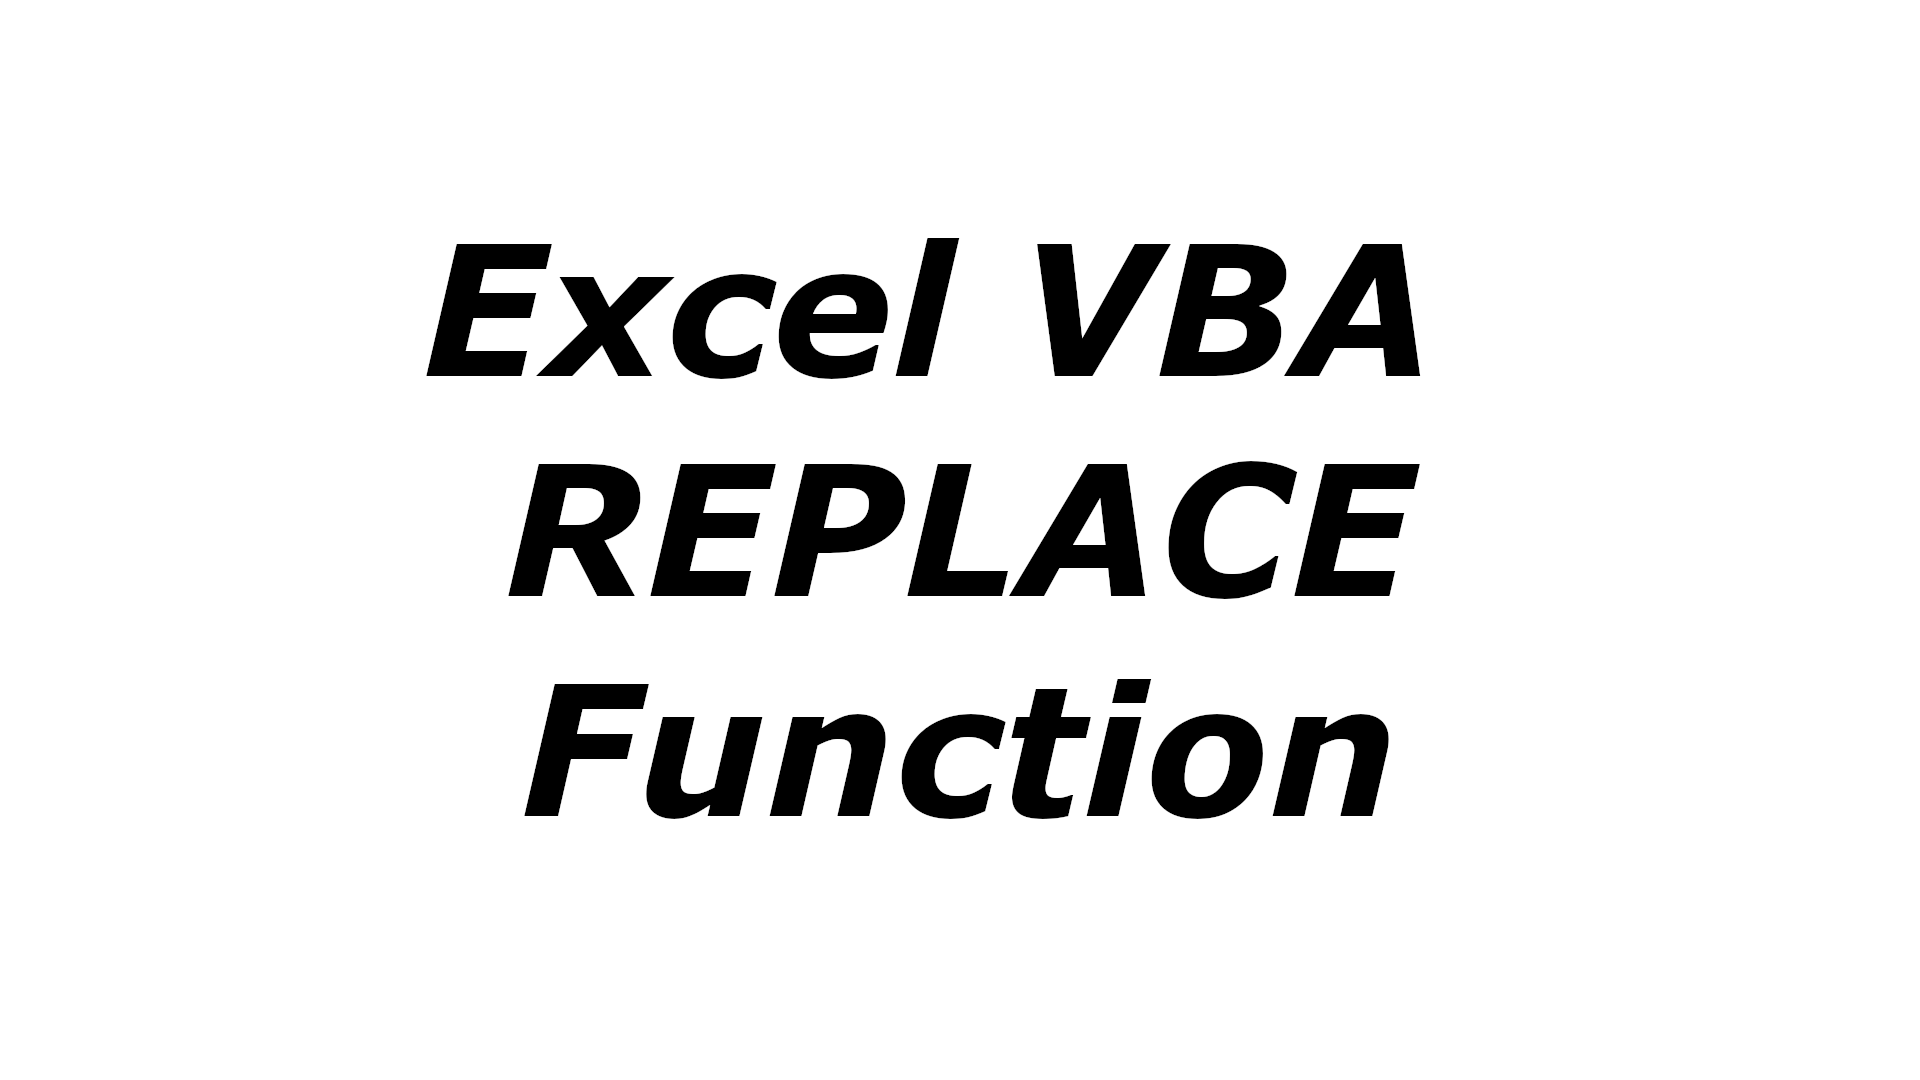 Excel VBA REPLACE function